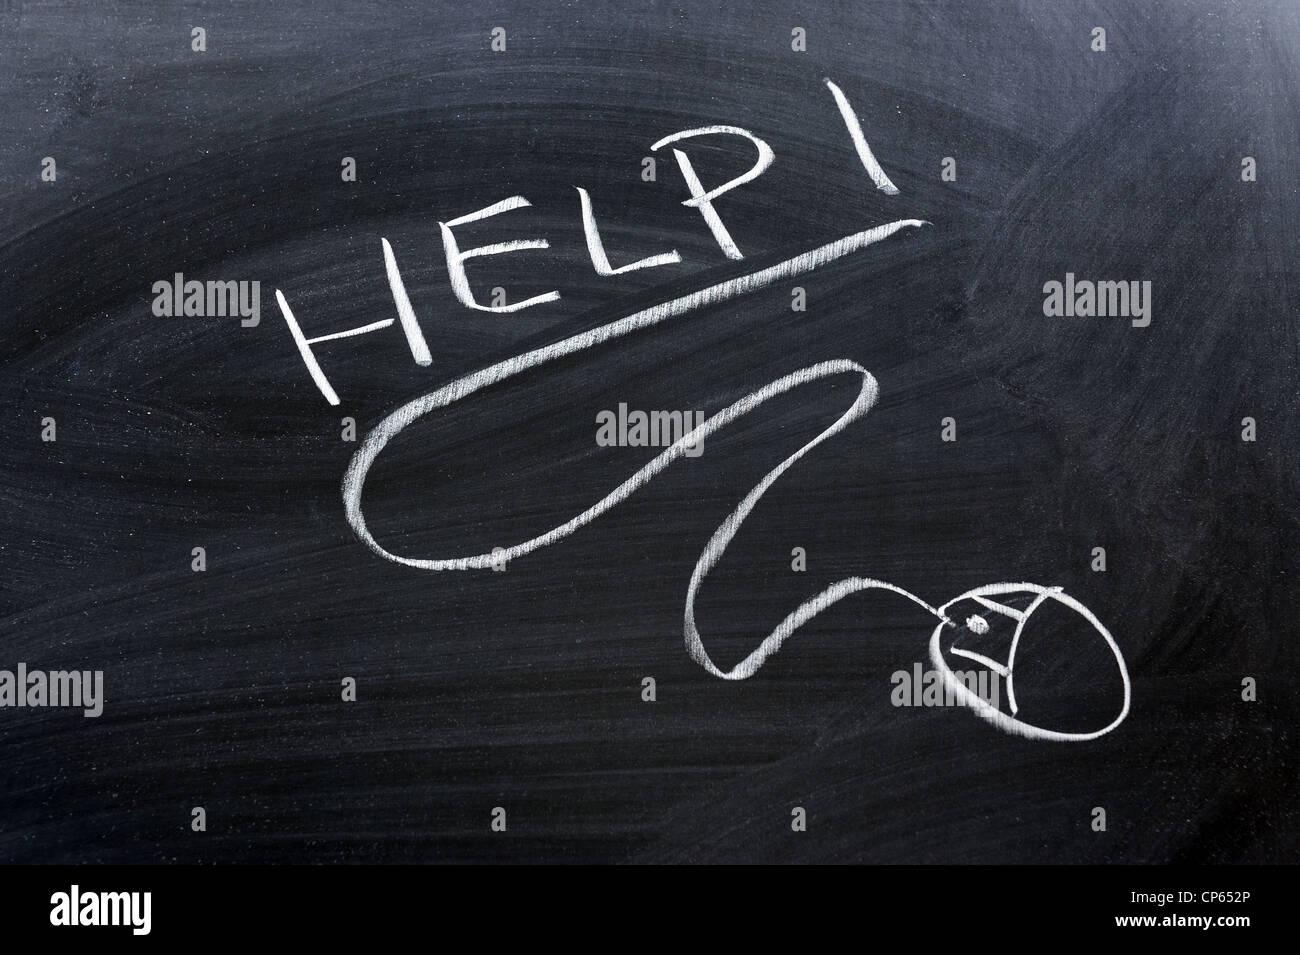 Help word and mouse drawn on chalkboard Stock Photo